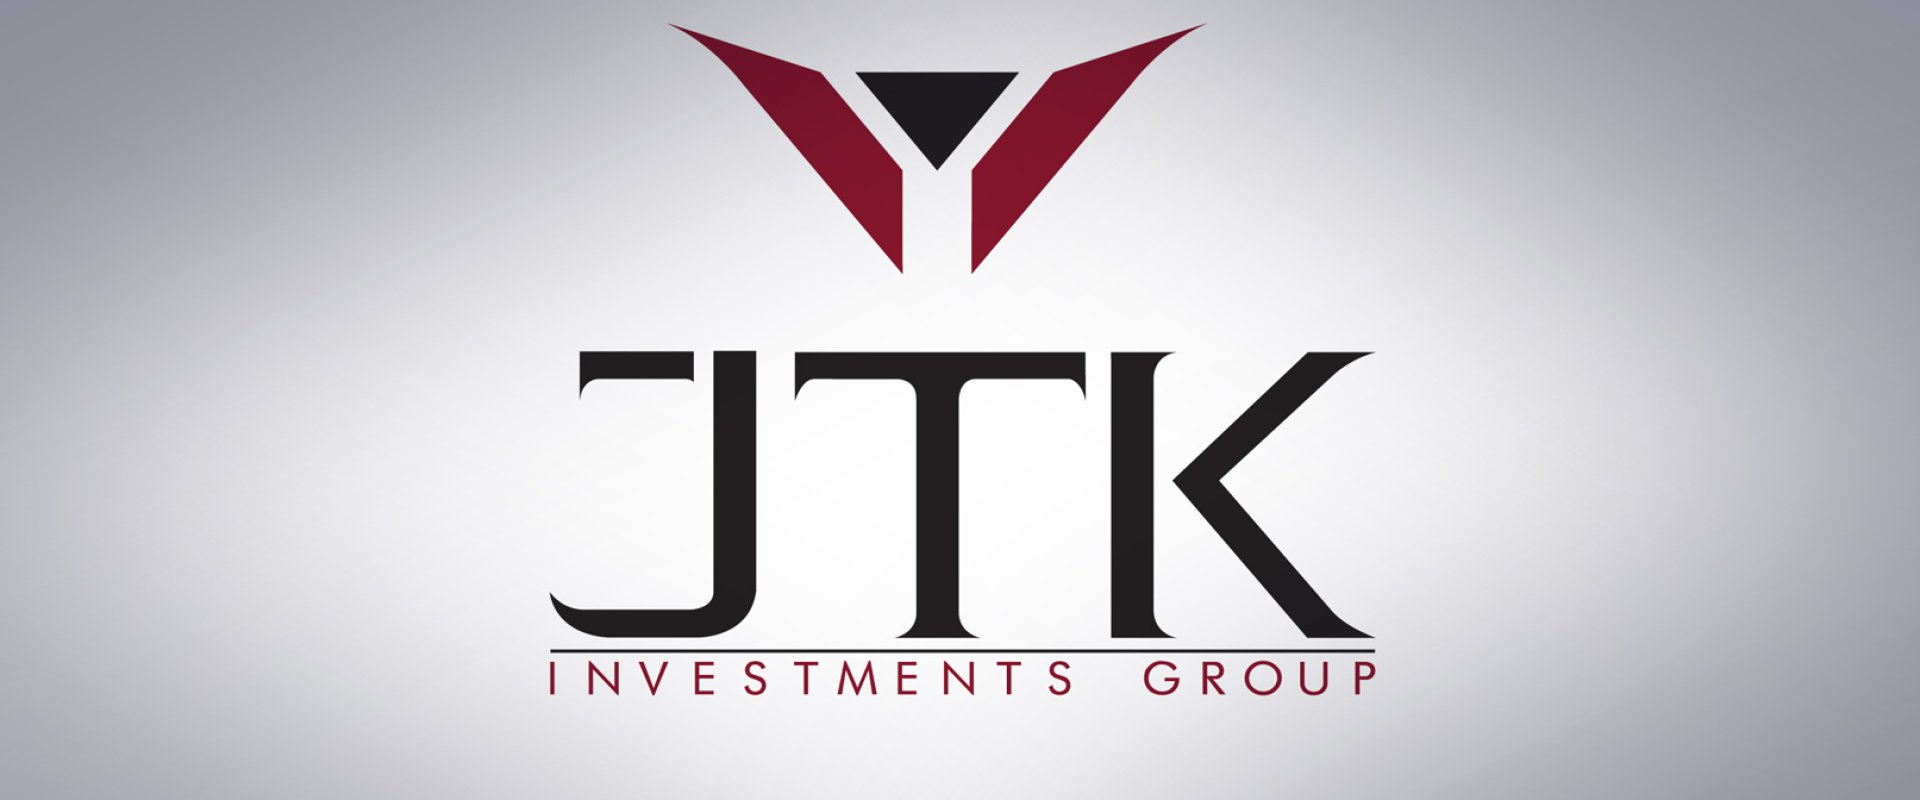 JTK Investments Group #1